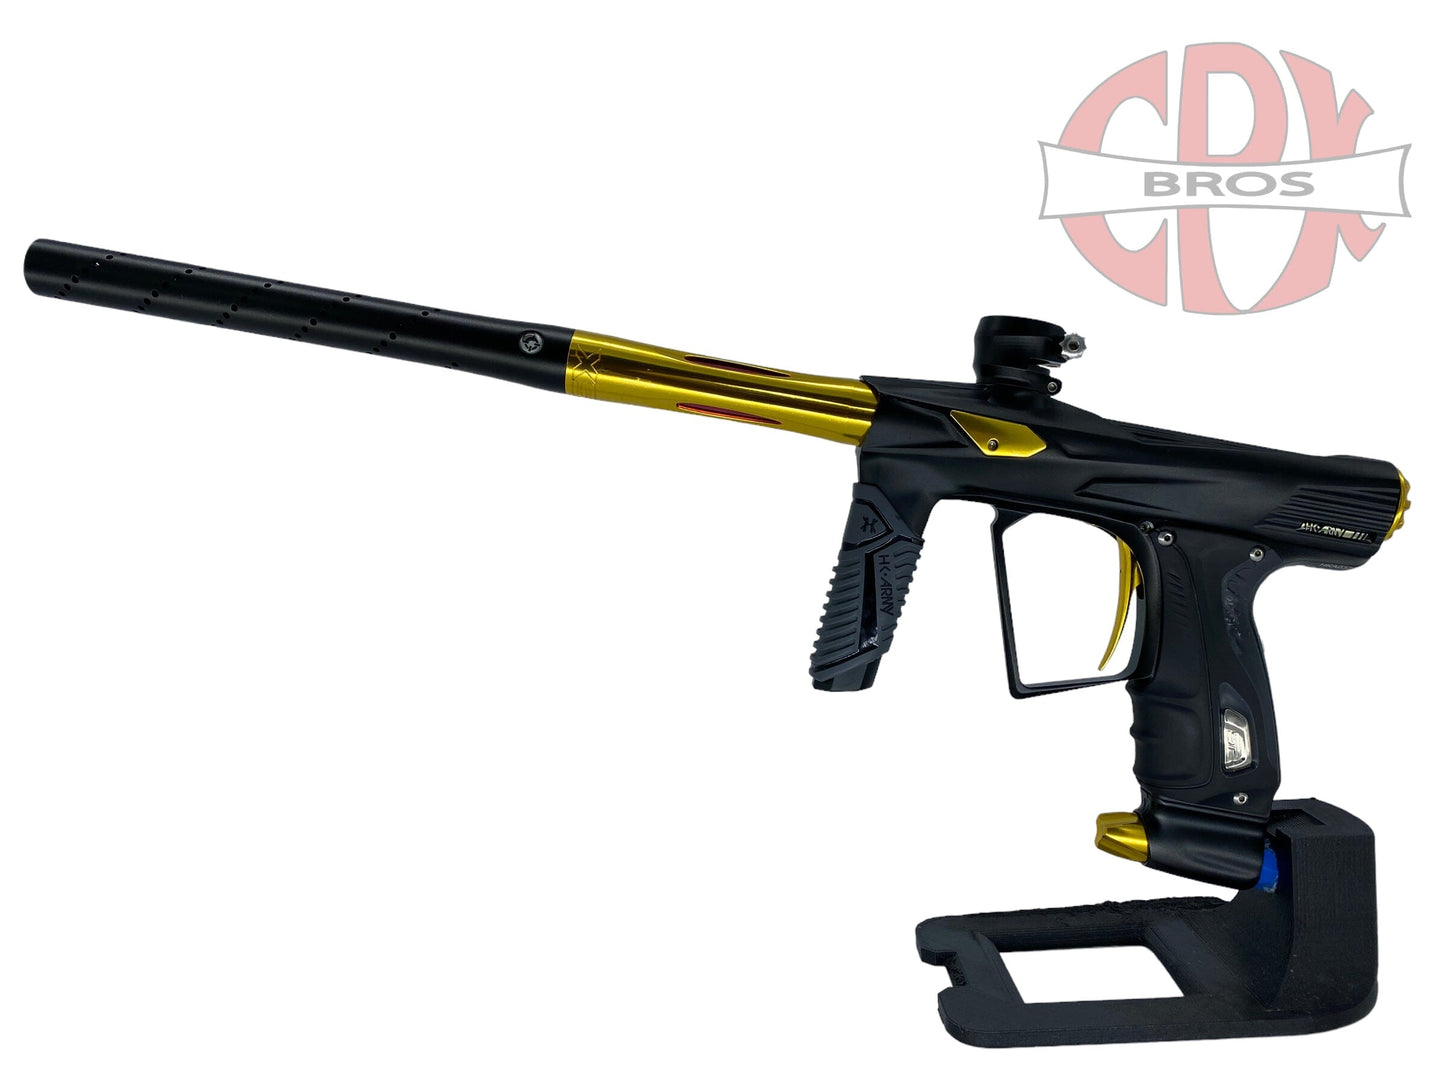 Used Hk Army Shocker Rsx Paintball Gun from CPXBrosPaintball Buy/Sell/Trade Paintball Markers, Paintball Hoppers, Paintball Masks, and Hormesis Headbands